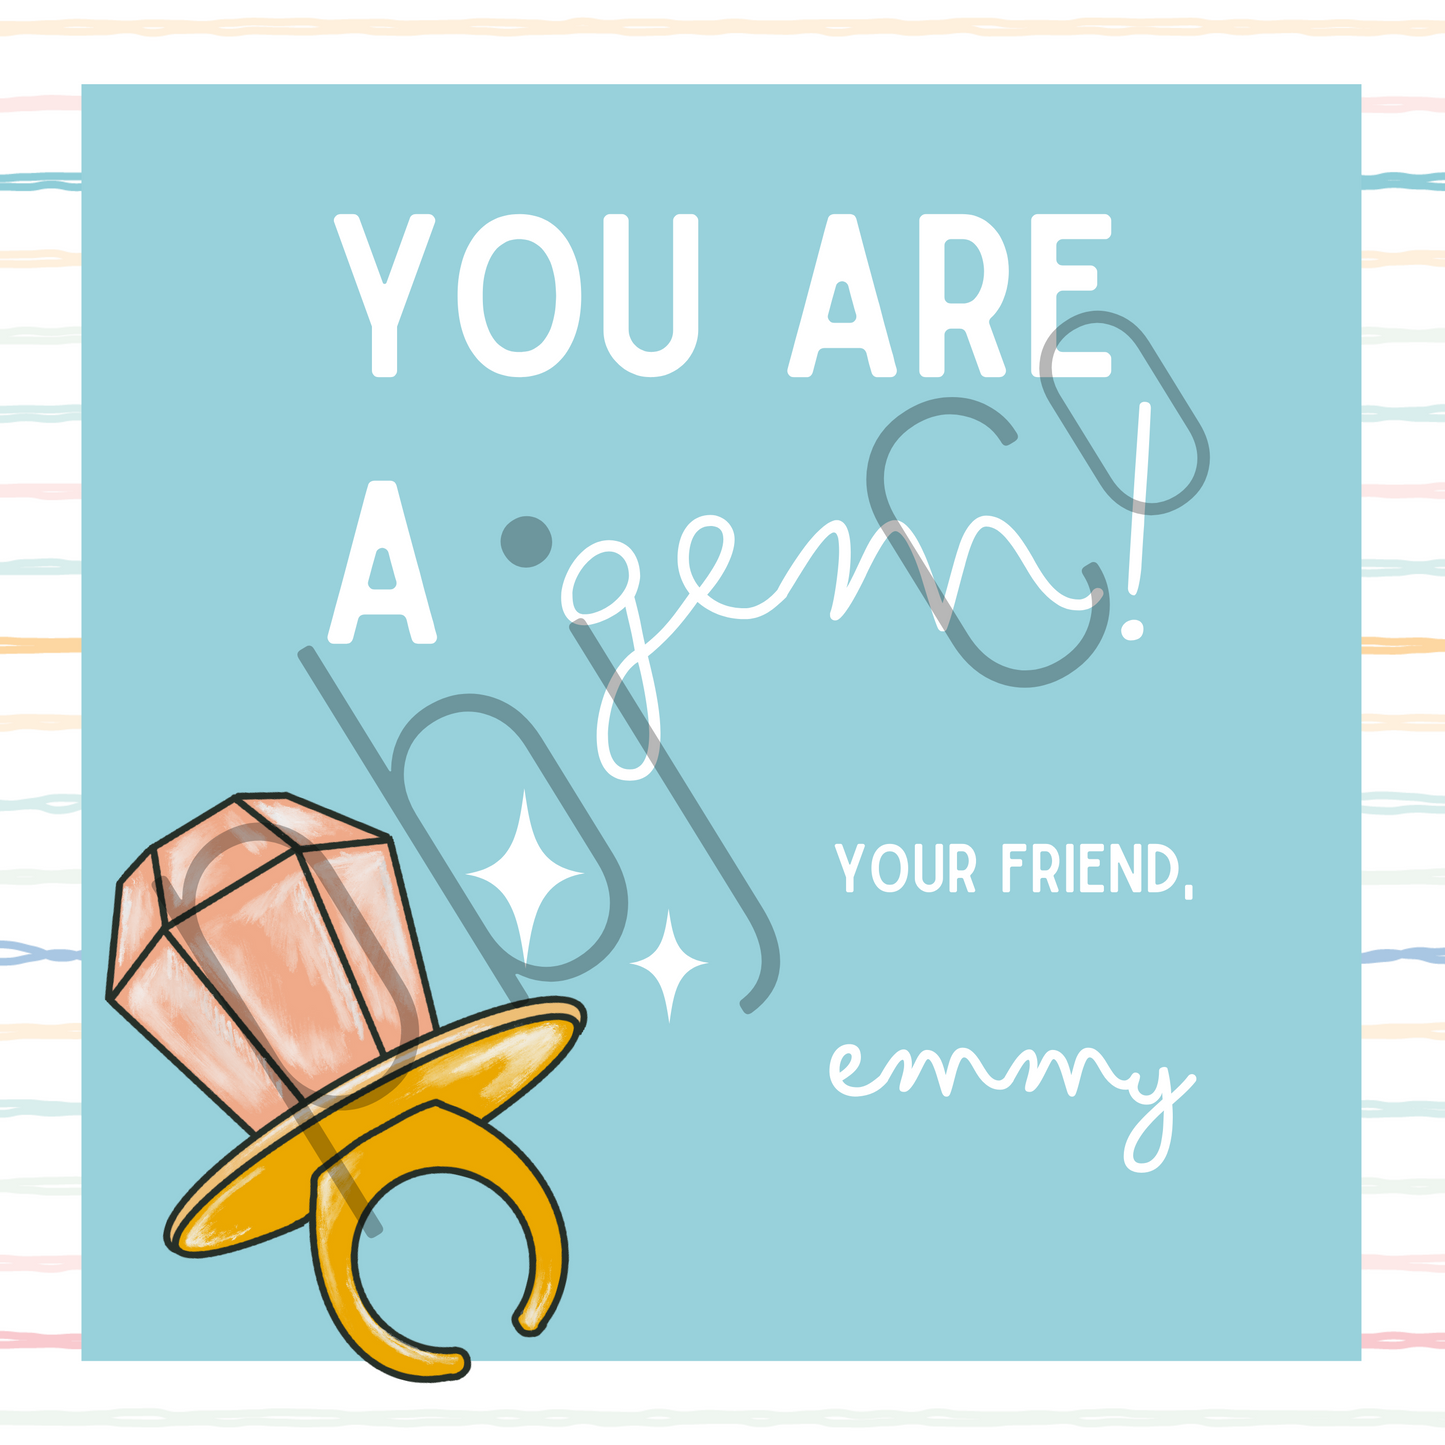 PRINTED Kids Customized You Are A Gem Valentine's Day Set of 24 Cards Favors Boy Girl Valentines Gift Tag With Envelopes Classroom Daycare Teacher